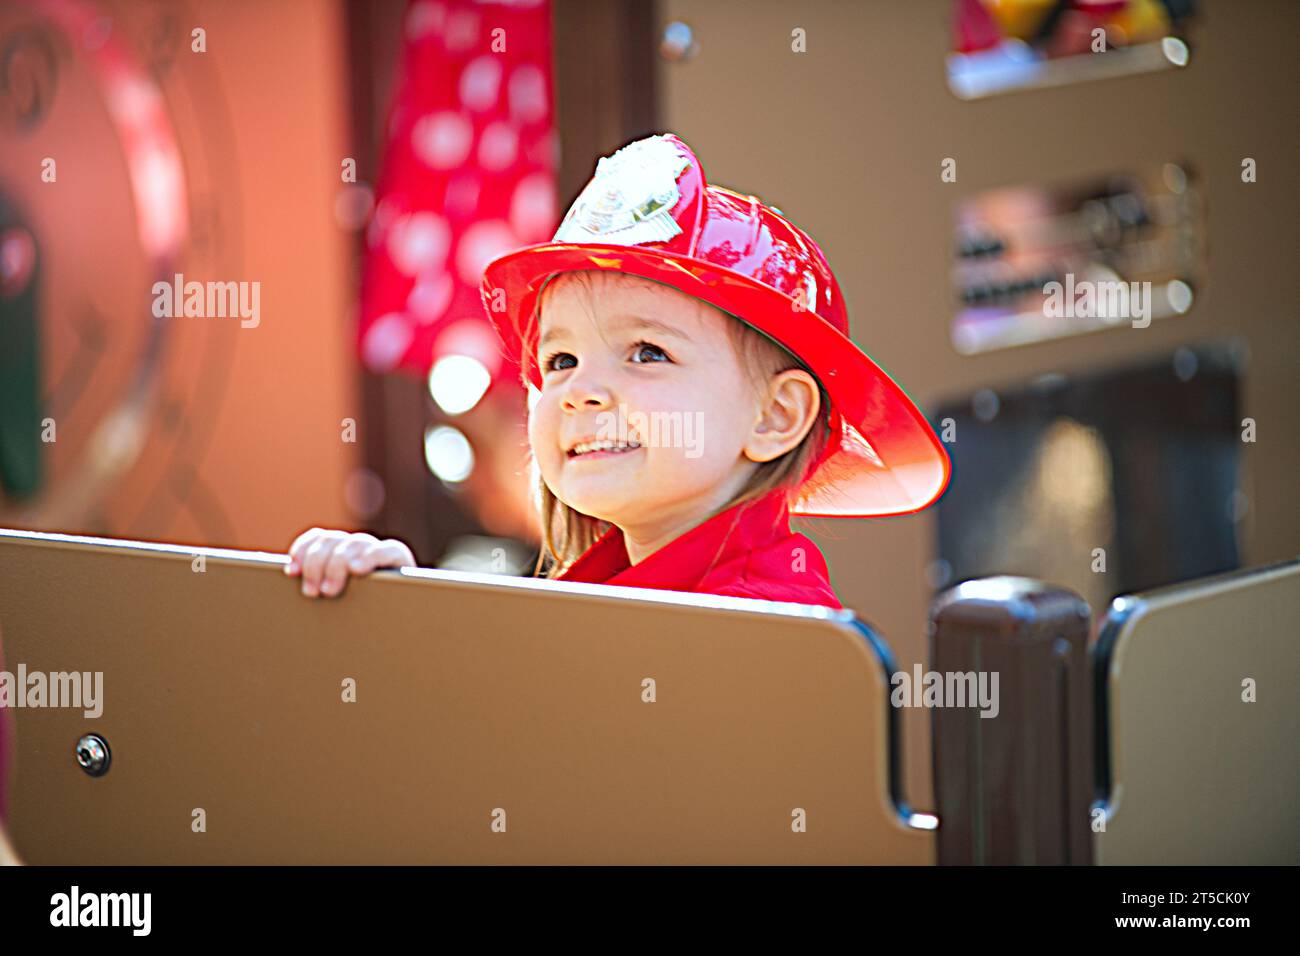 Halloweenpalooza - Dennis, Massachusetts on Cape Cod.  A family celebration of Halloween. A young 'fireman' at the event. Stock Photo